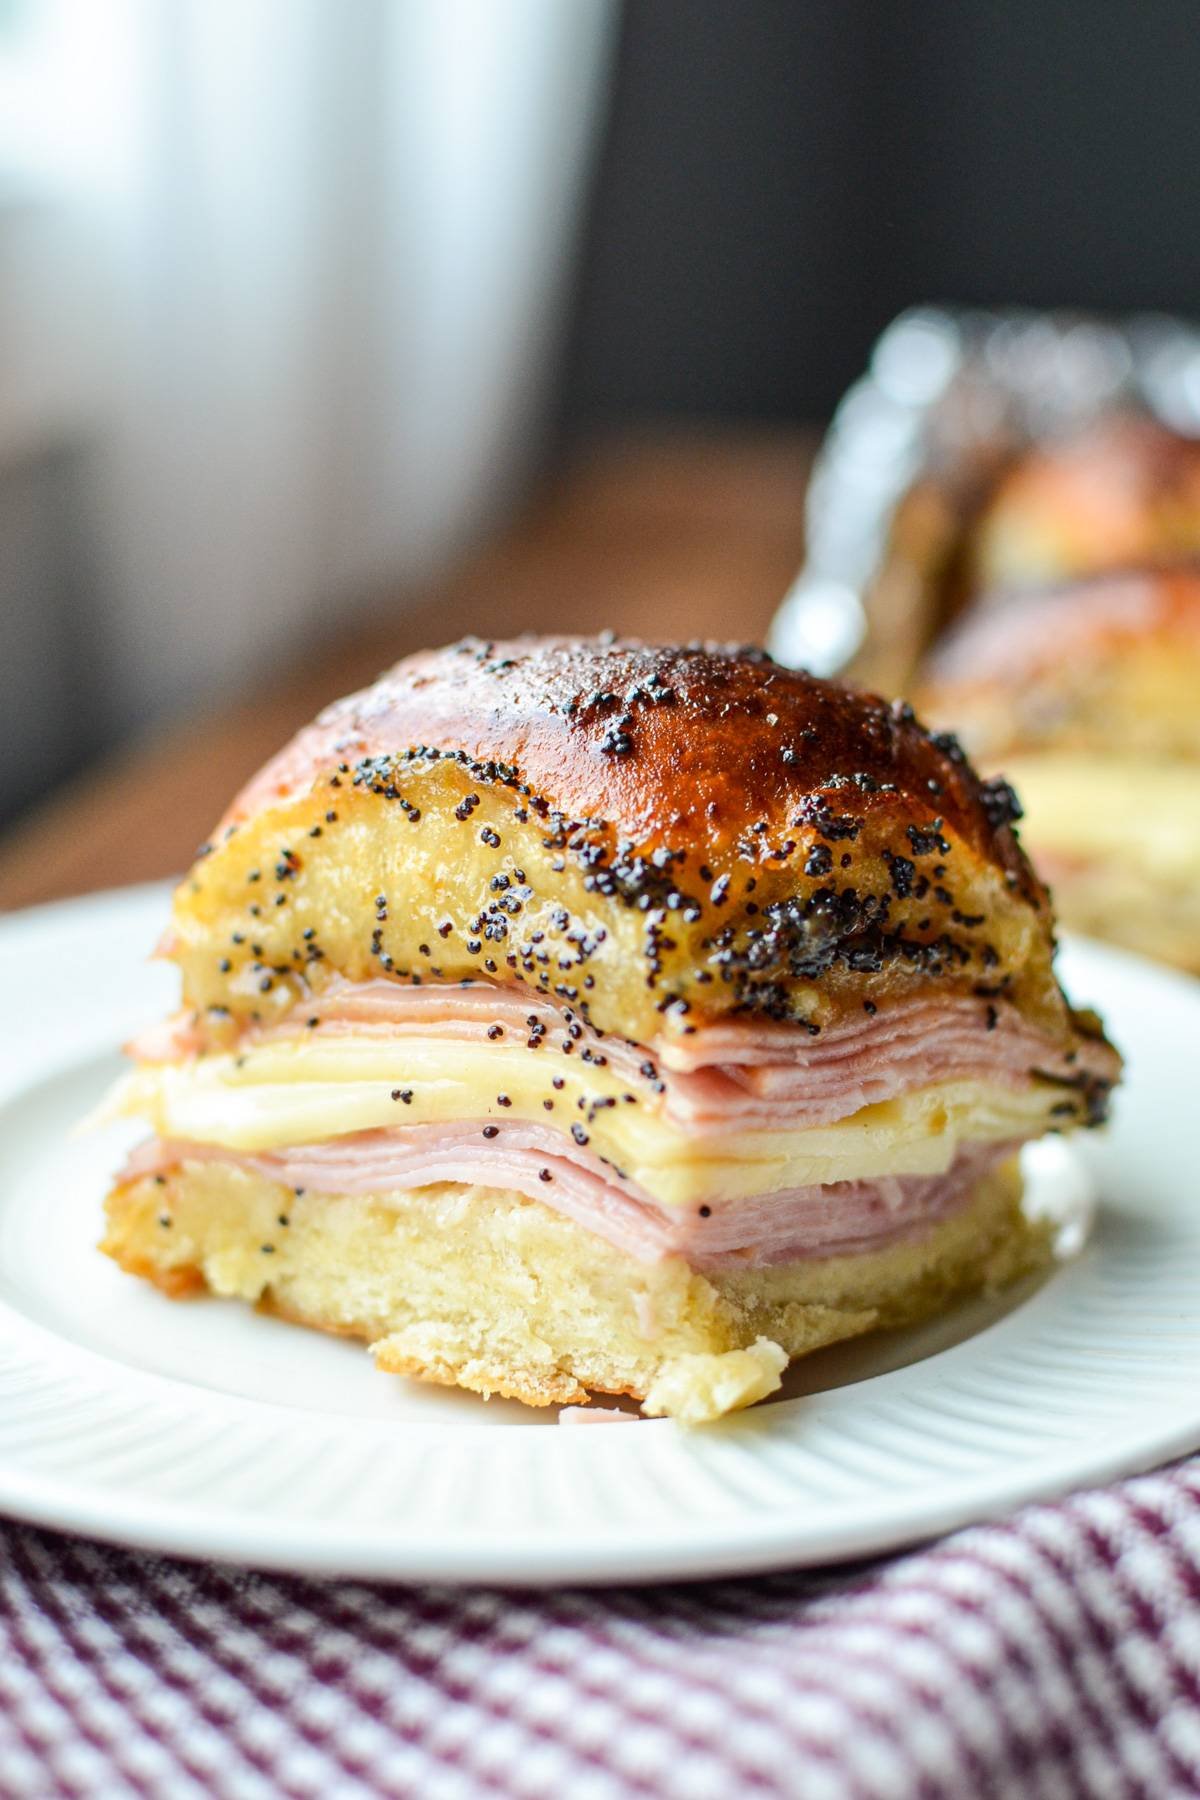 A single ham and cheese slider on a plate, covered in a poppy seed sauce.